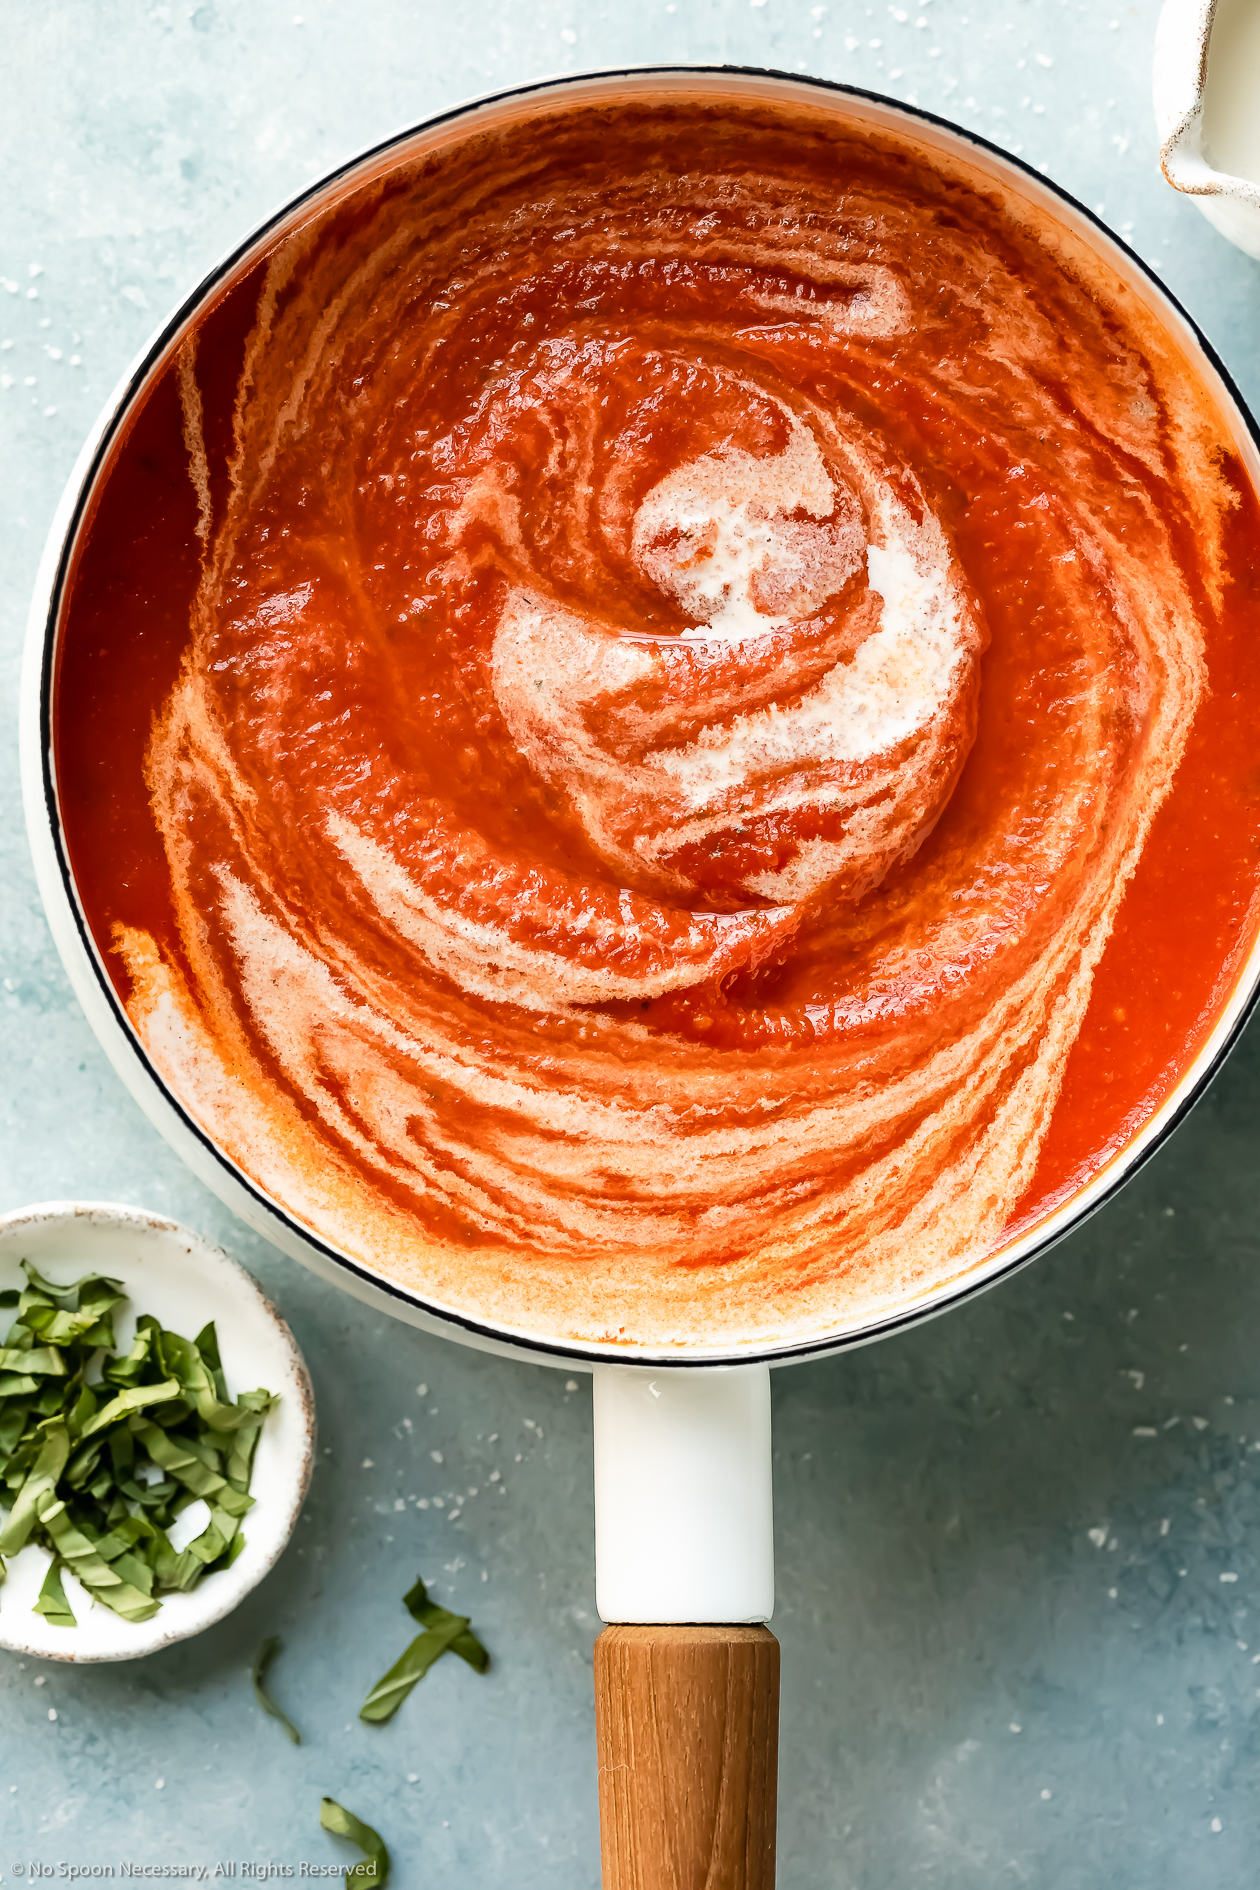 Up-close angled photo of creamy homemade vodka sauce in a white saucepan with a black ladle lifting some of the sauce out of the pan.